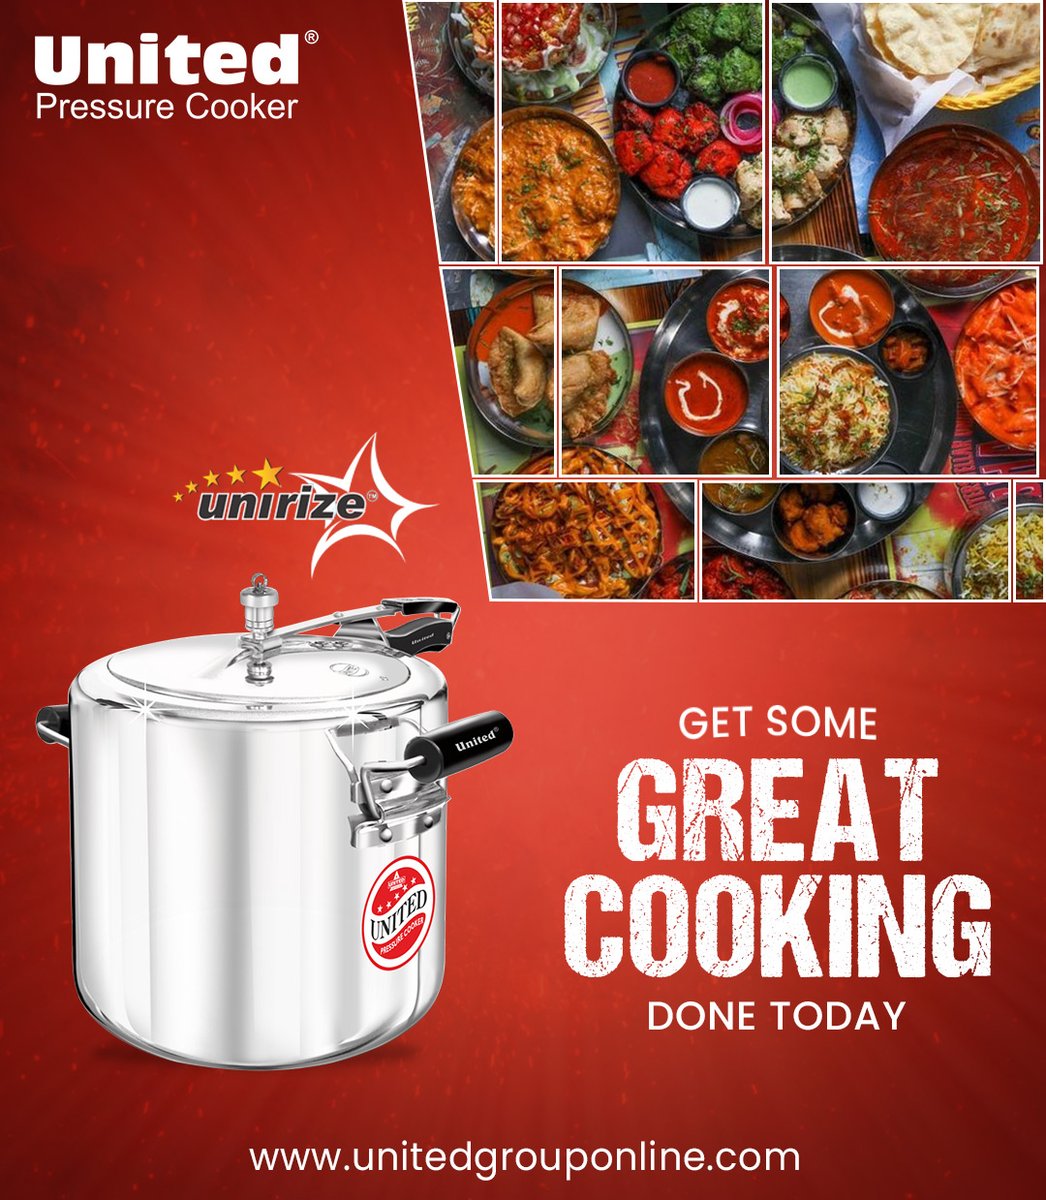 Get some great cooking done today...
.
.
#unitedpressurecookers #Cookers #Cookware #PressureCookers #silky #unirize #eliteplust #Ezylock #HealthyCooking #stainlesssteel
#Durable #Reliable #PremiumQuality #Tastyfood #Chefchoice
#Qualityproduct #Customersatisfaction